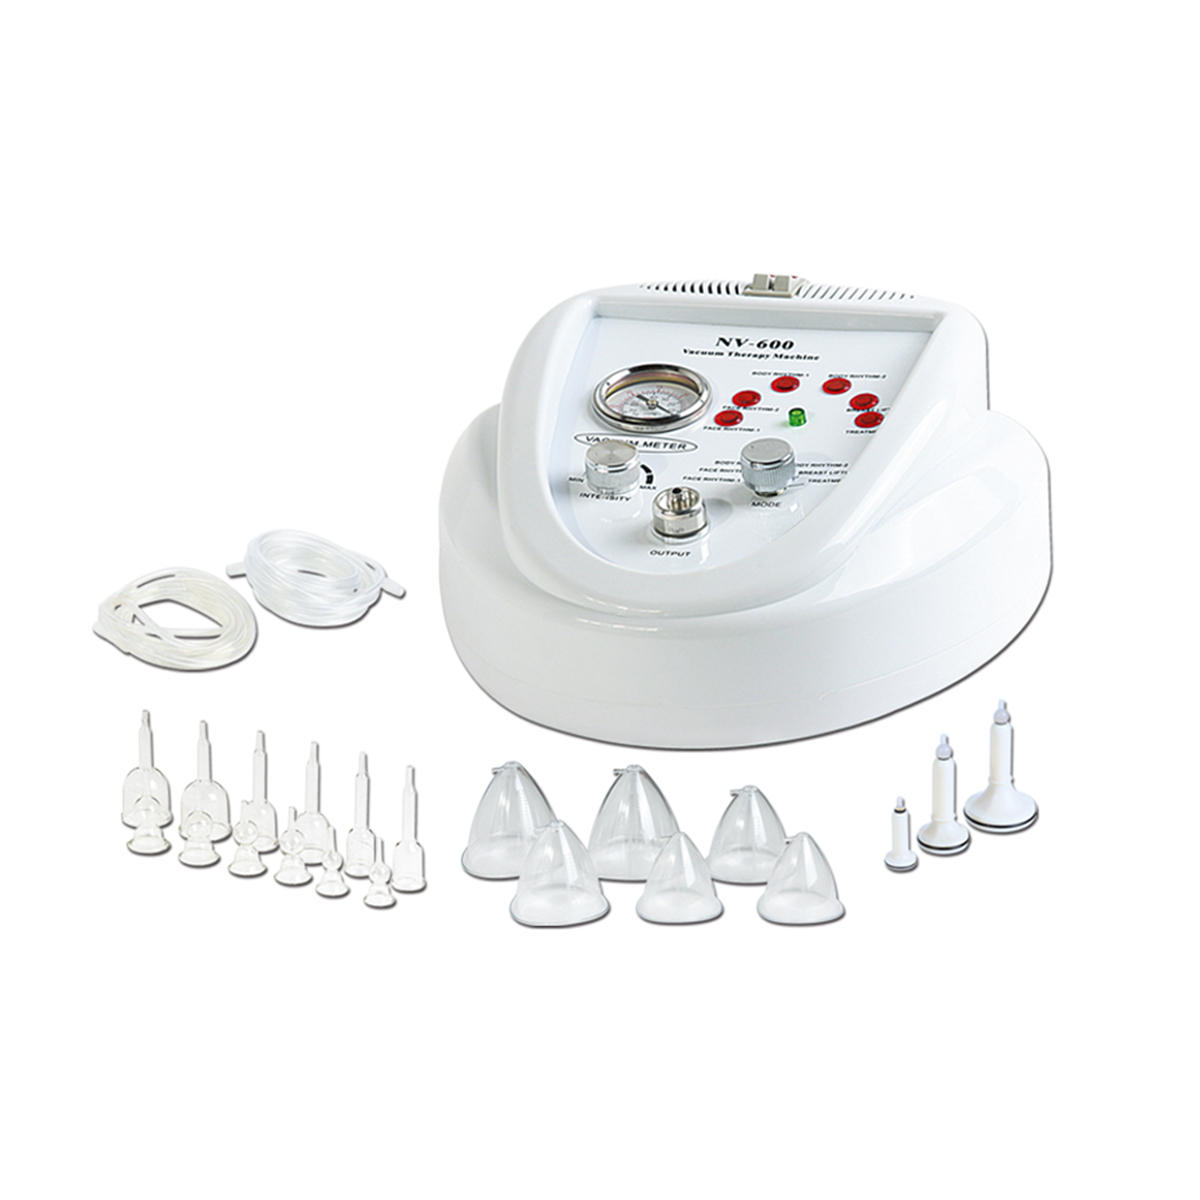 NV-600 Vacuum Massage Therapy Body Shaping Breast Enhancement Massager